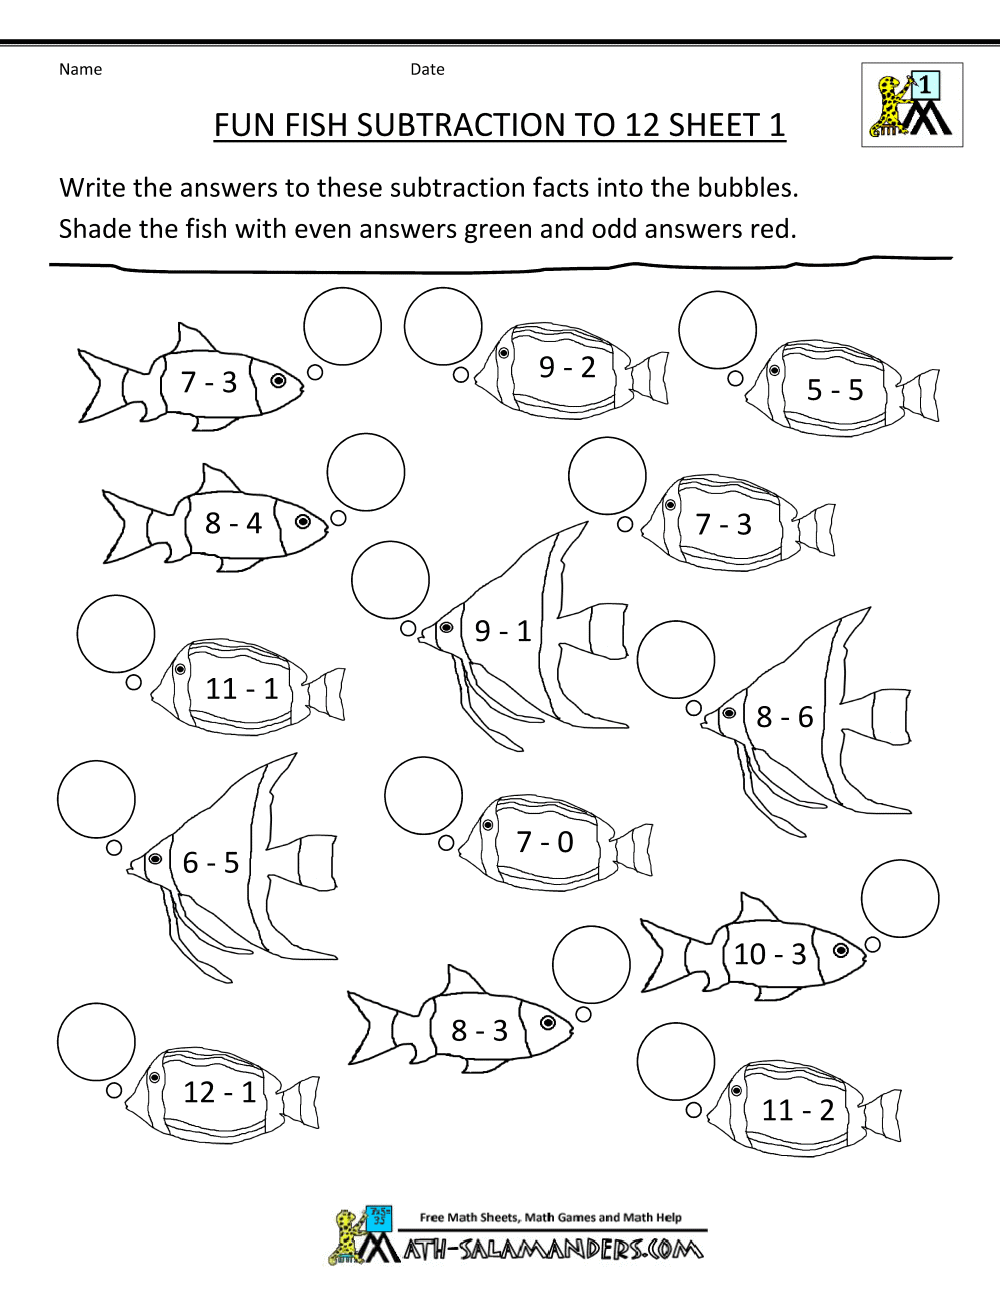 Free Subtraction Coloring Pages, Download Free Subtraction Coloring